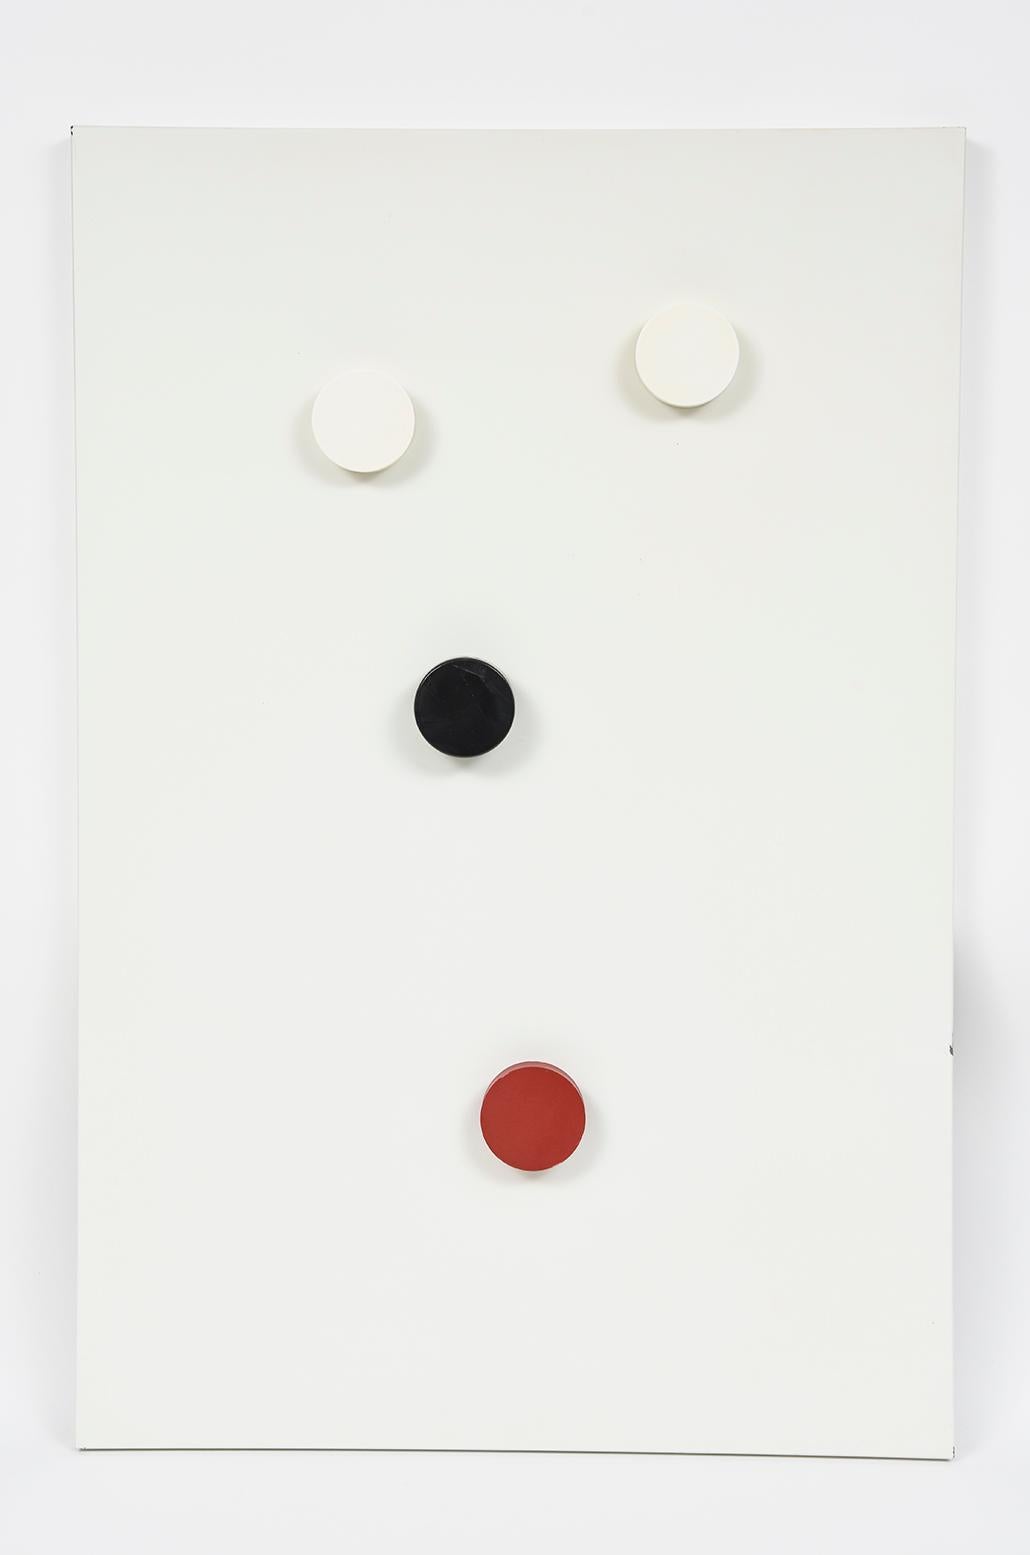 Li Yuan-chia
Cosmic 'Point' Multiple
1929–1994
This Original piece from Lisson Gallery London 1968 Exhibition features a painted white lacquered steel panel with 4 magnetic points plastic 2 white, 1 black and 1 red circles. The magnetic points